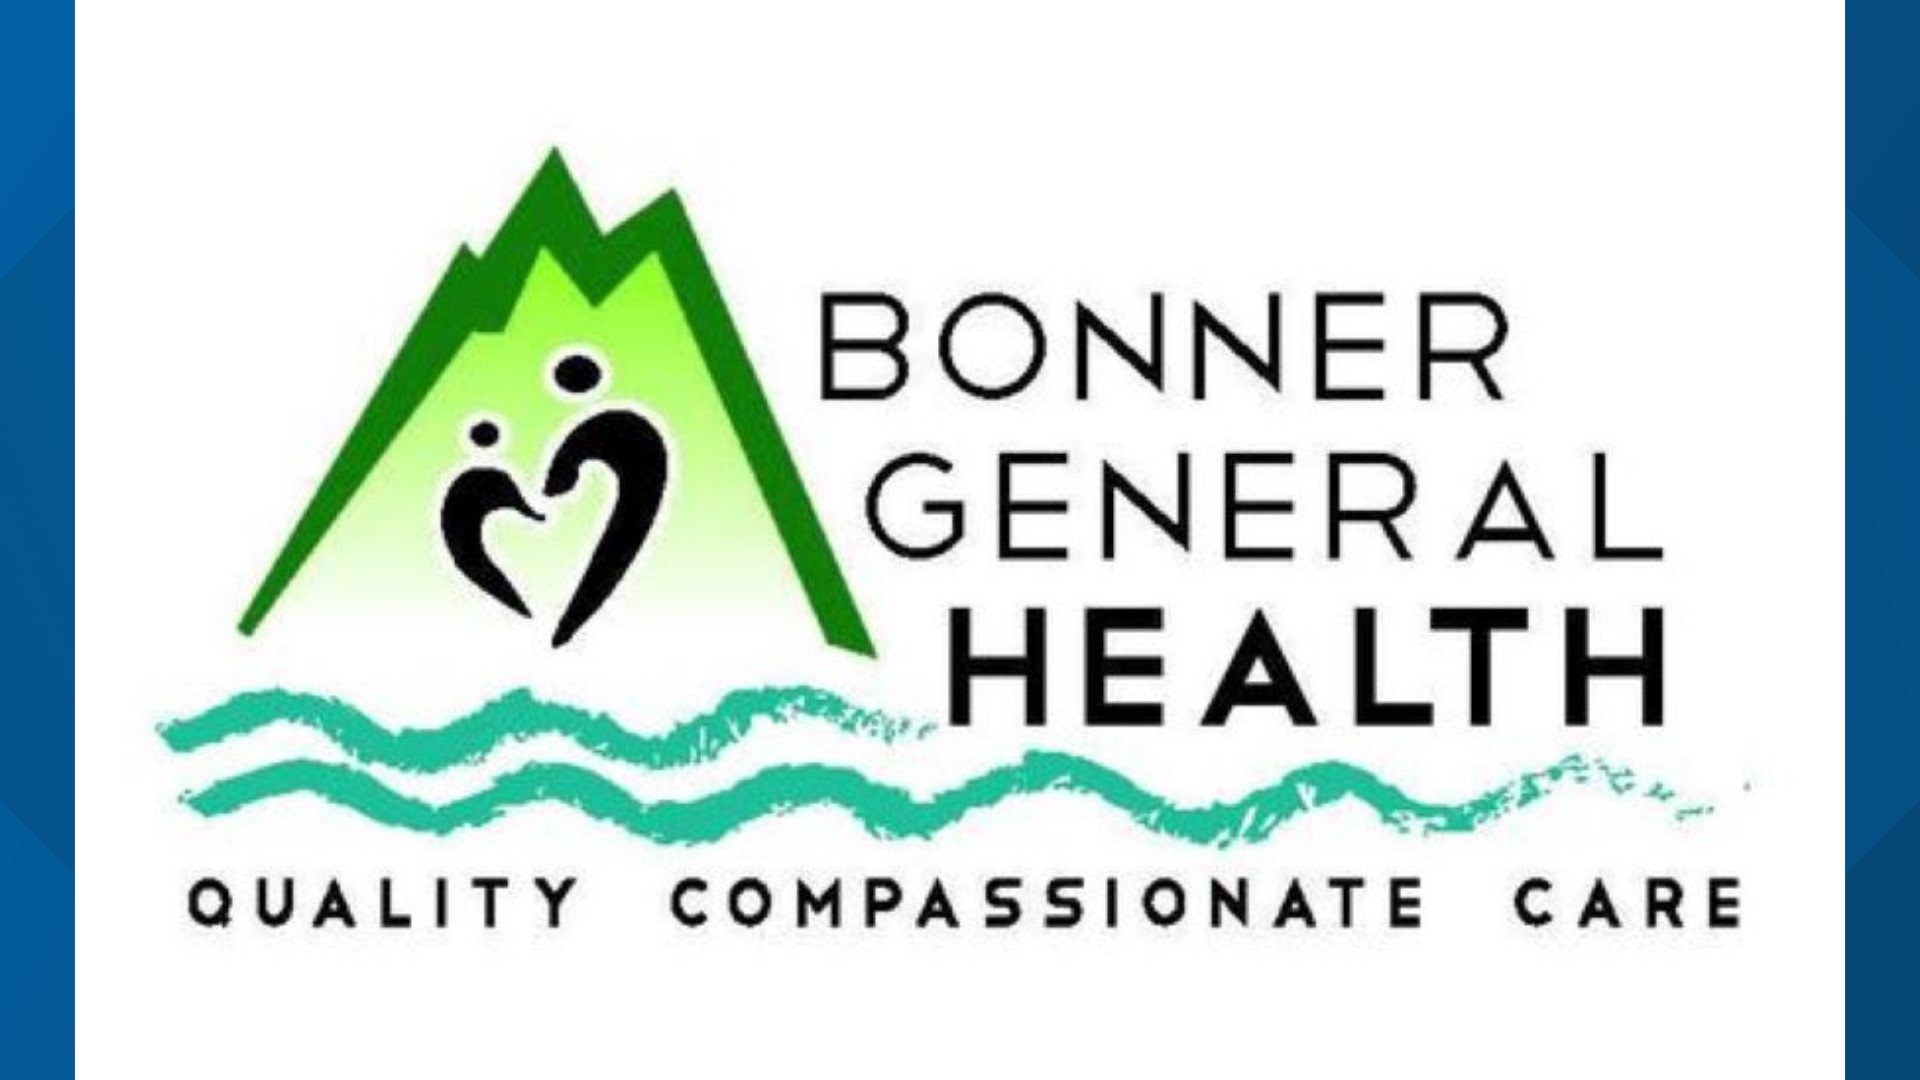 BGH cited a loss of pediatrician coverage, volumes of changing demographics and Idaho's legal and political climate as the main reasons behind this decision.